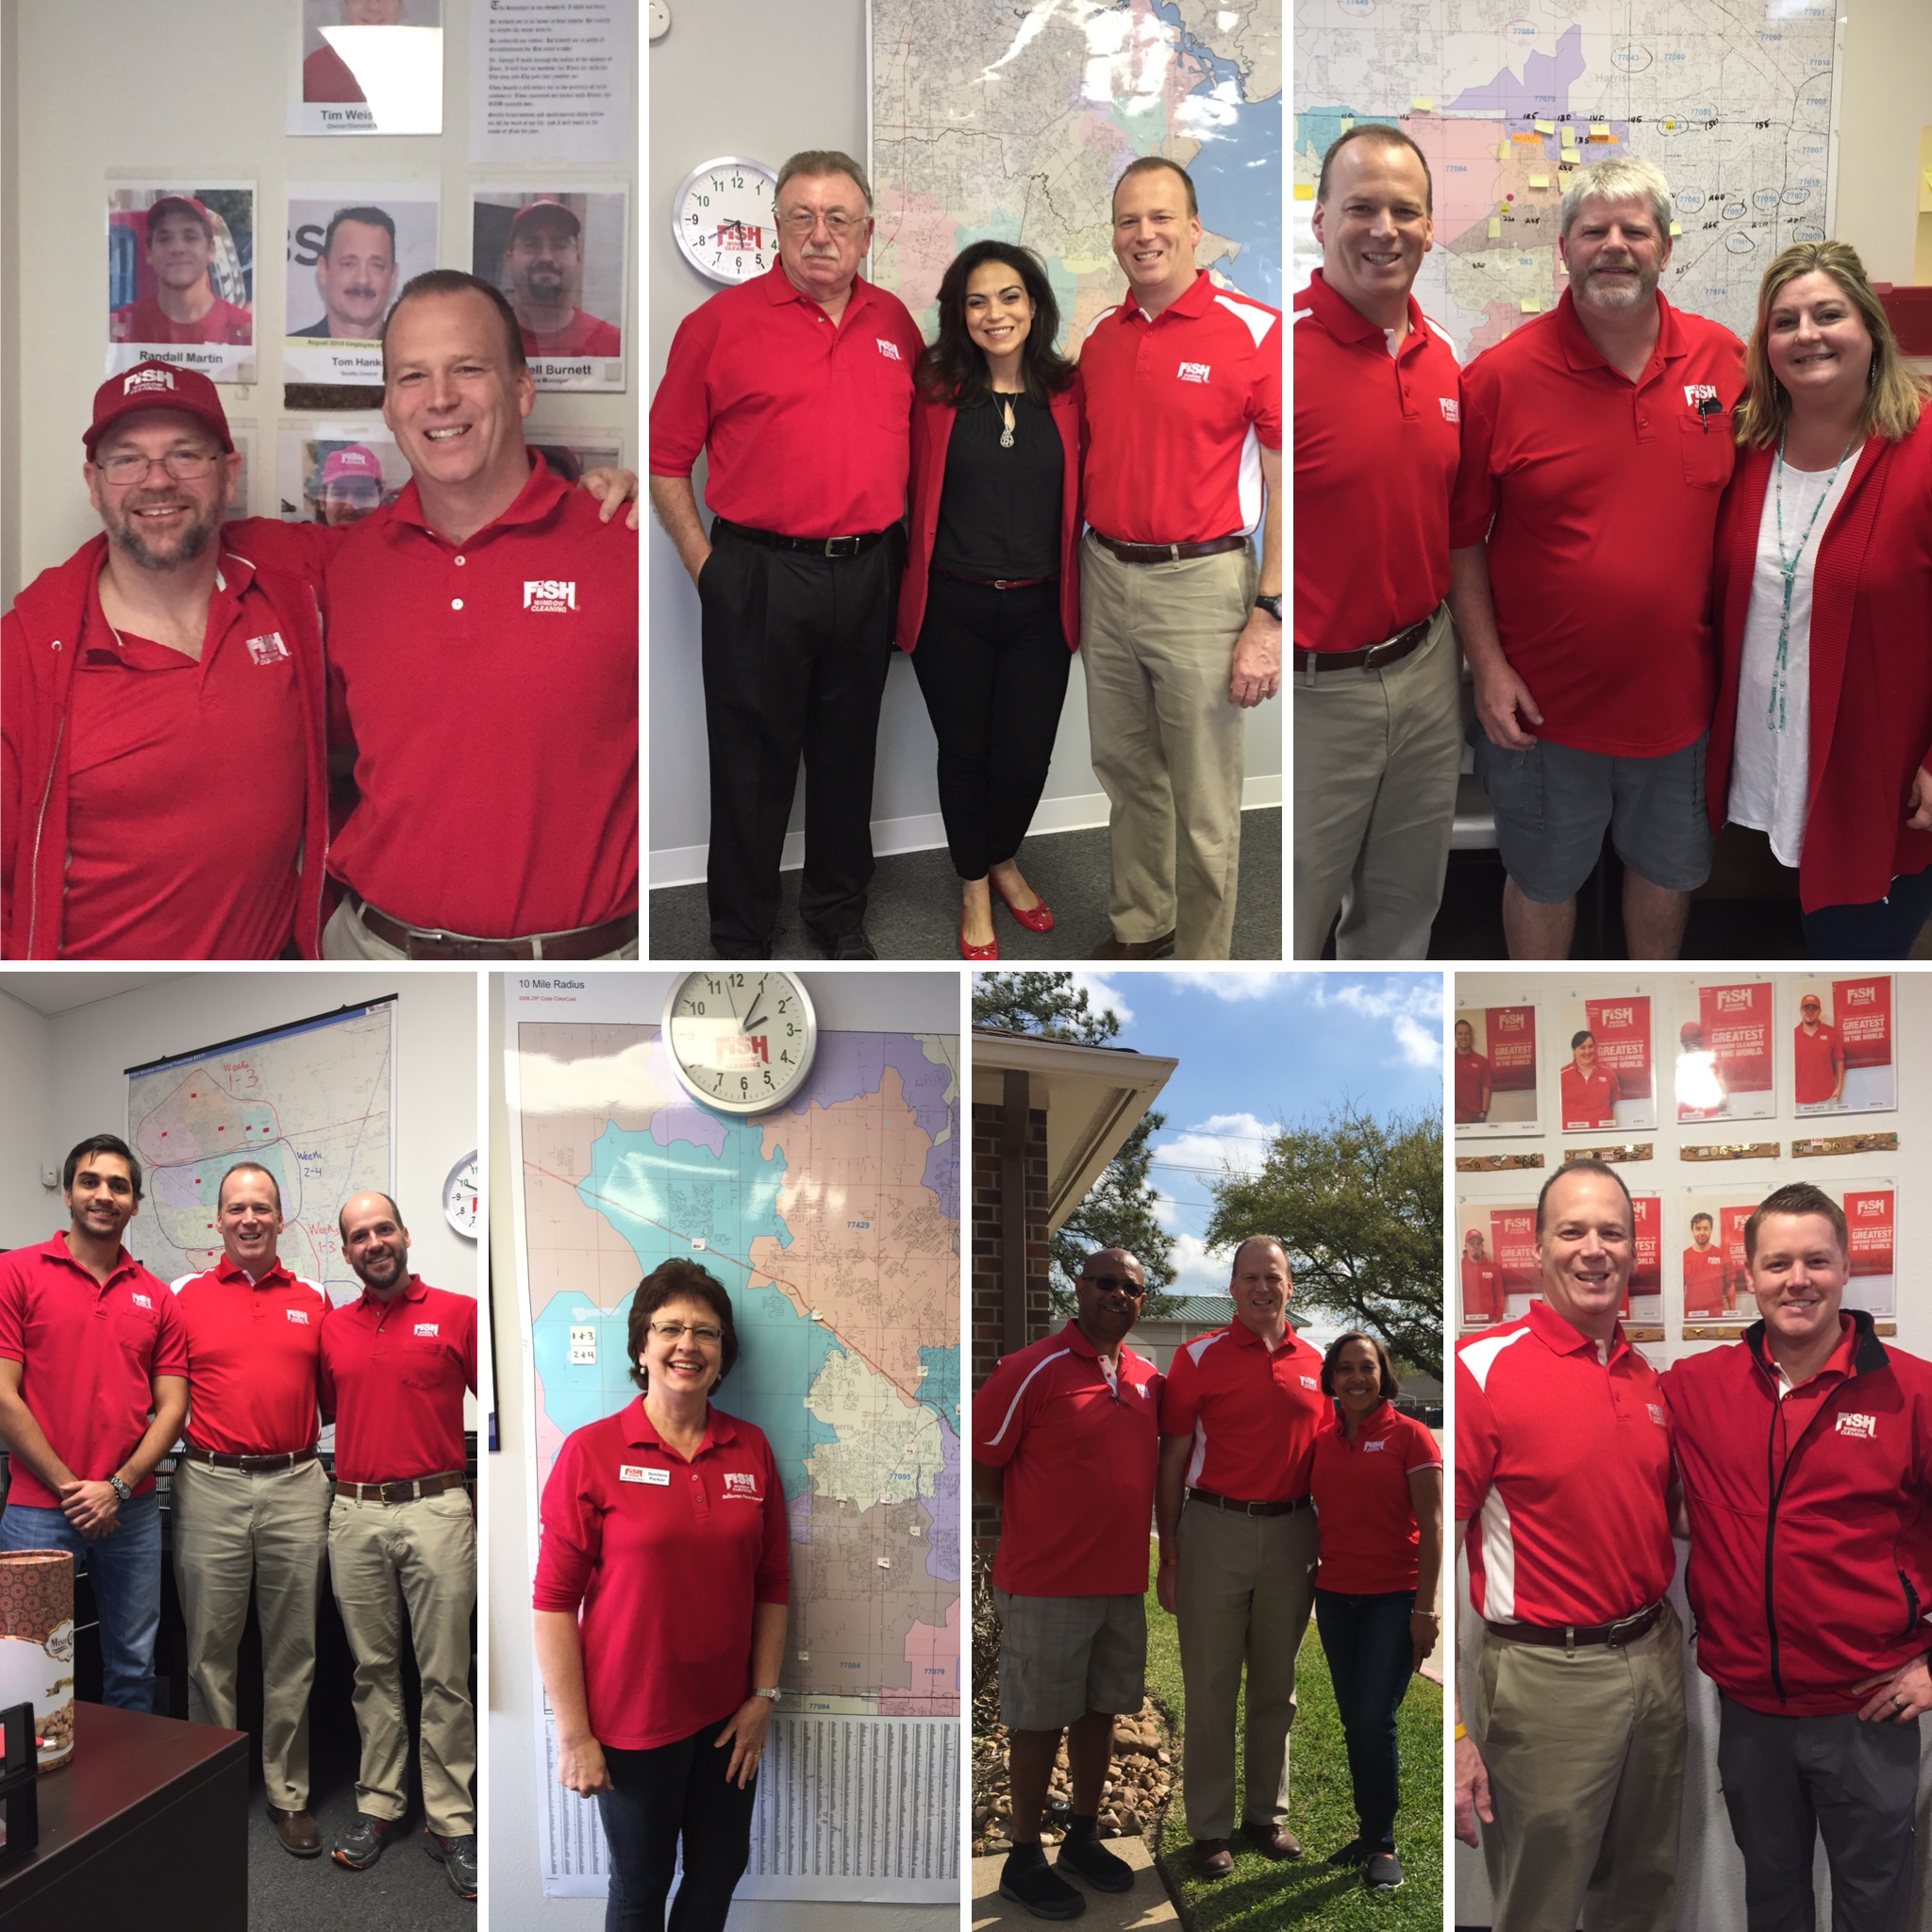 Collage of Photos with Randy Cross and Franchisees